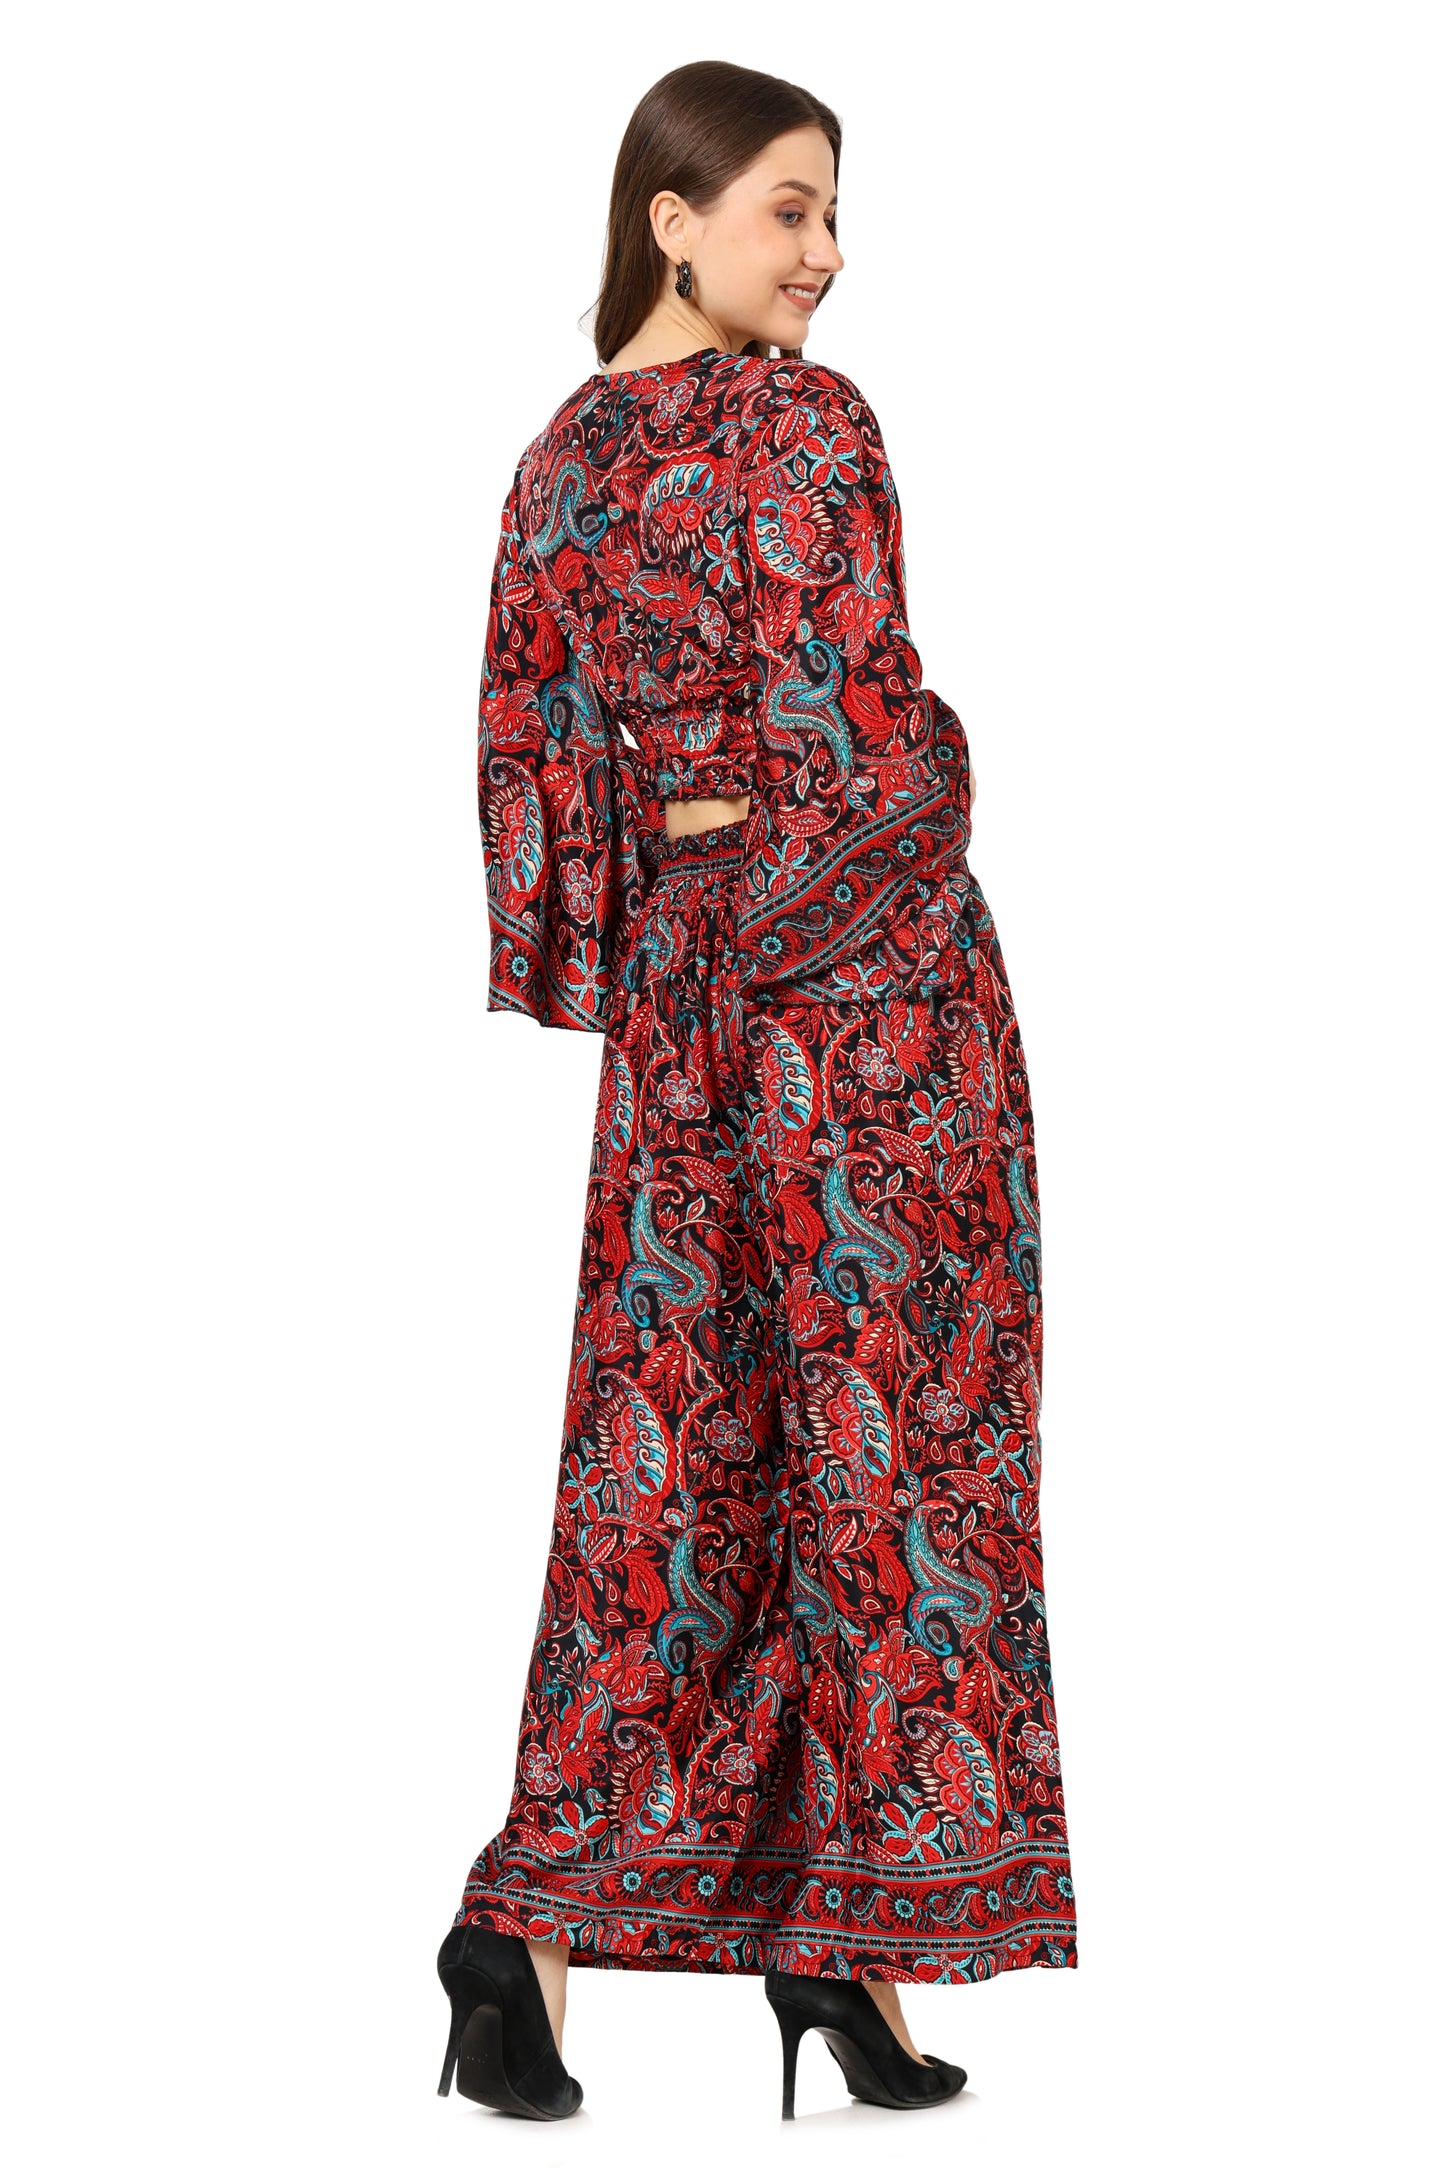 Yash Gallery Women's Red Floral Printed Smoking Embroidered Co-Ord Set (Red)